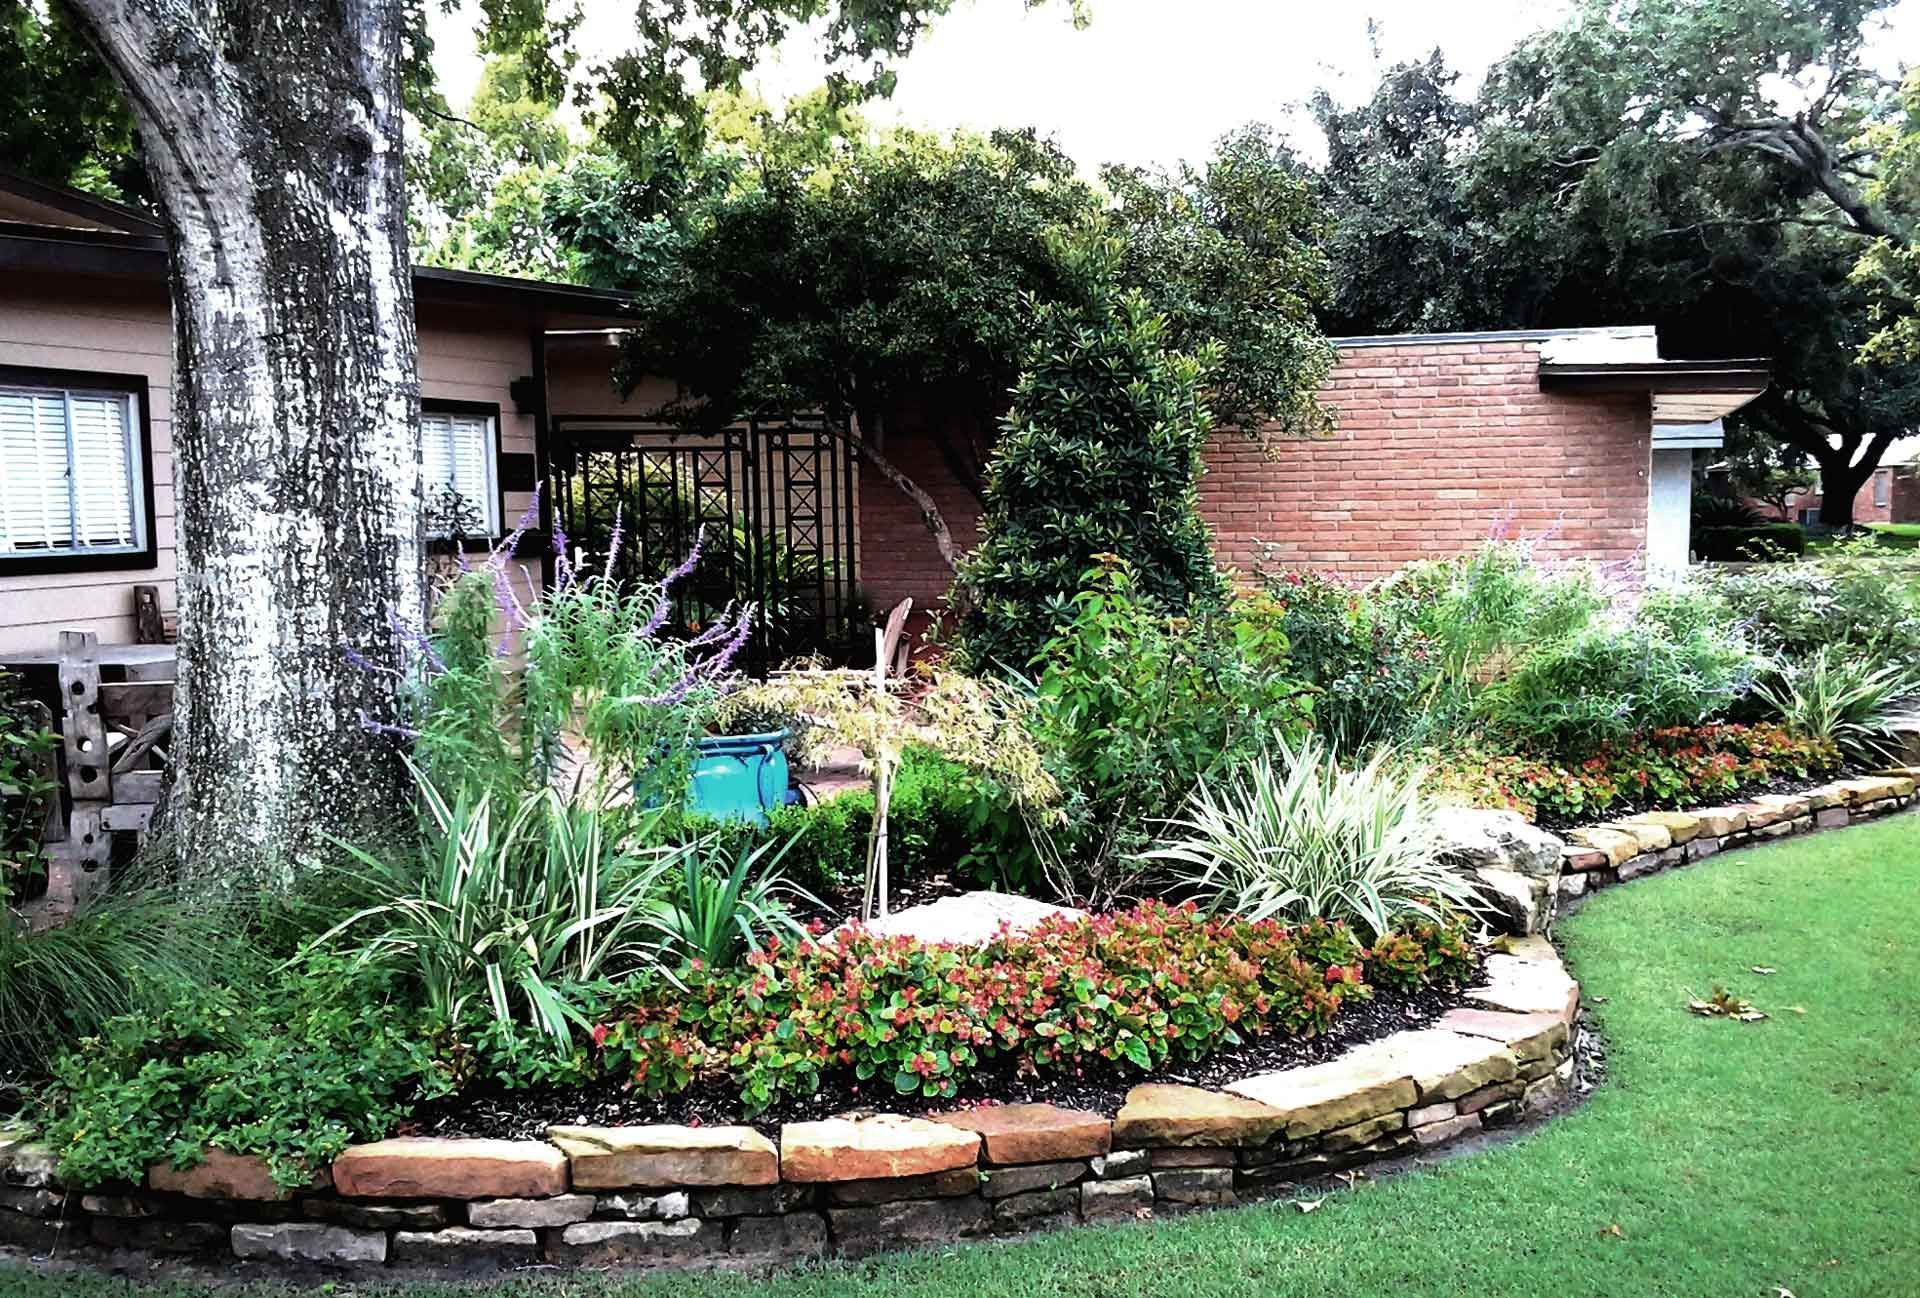 Lush landscaping bed with typical Texas plants